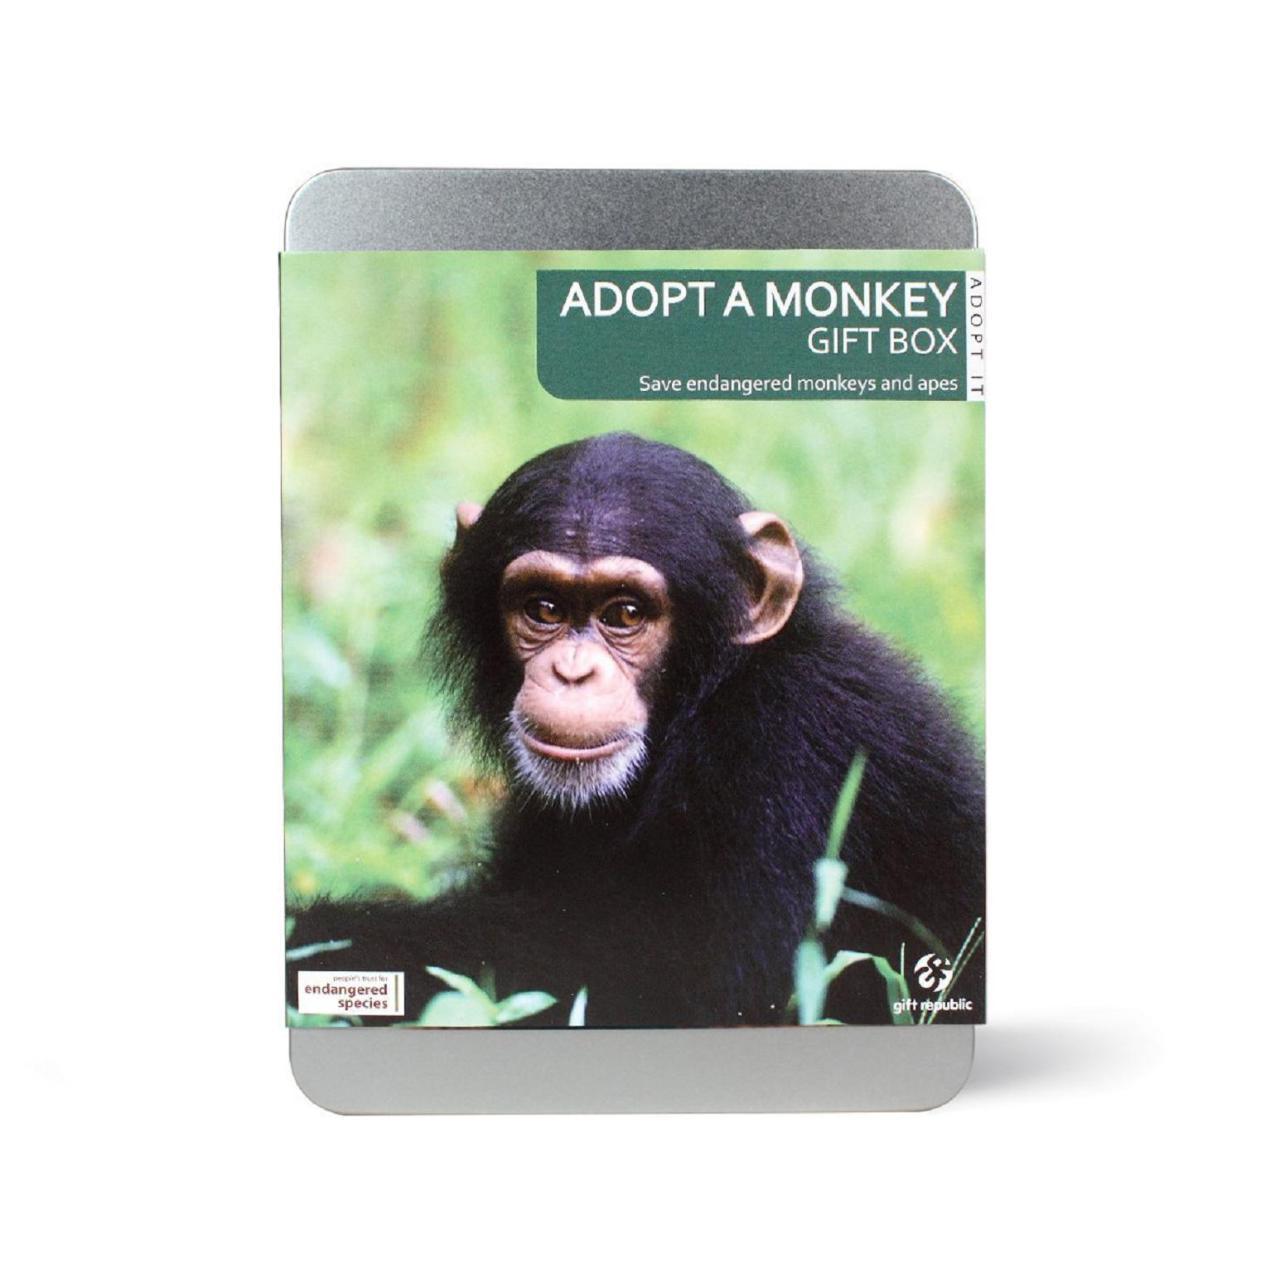 An image of Adopt A Monkey